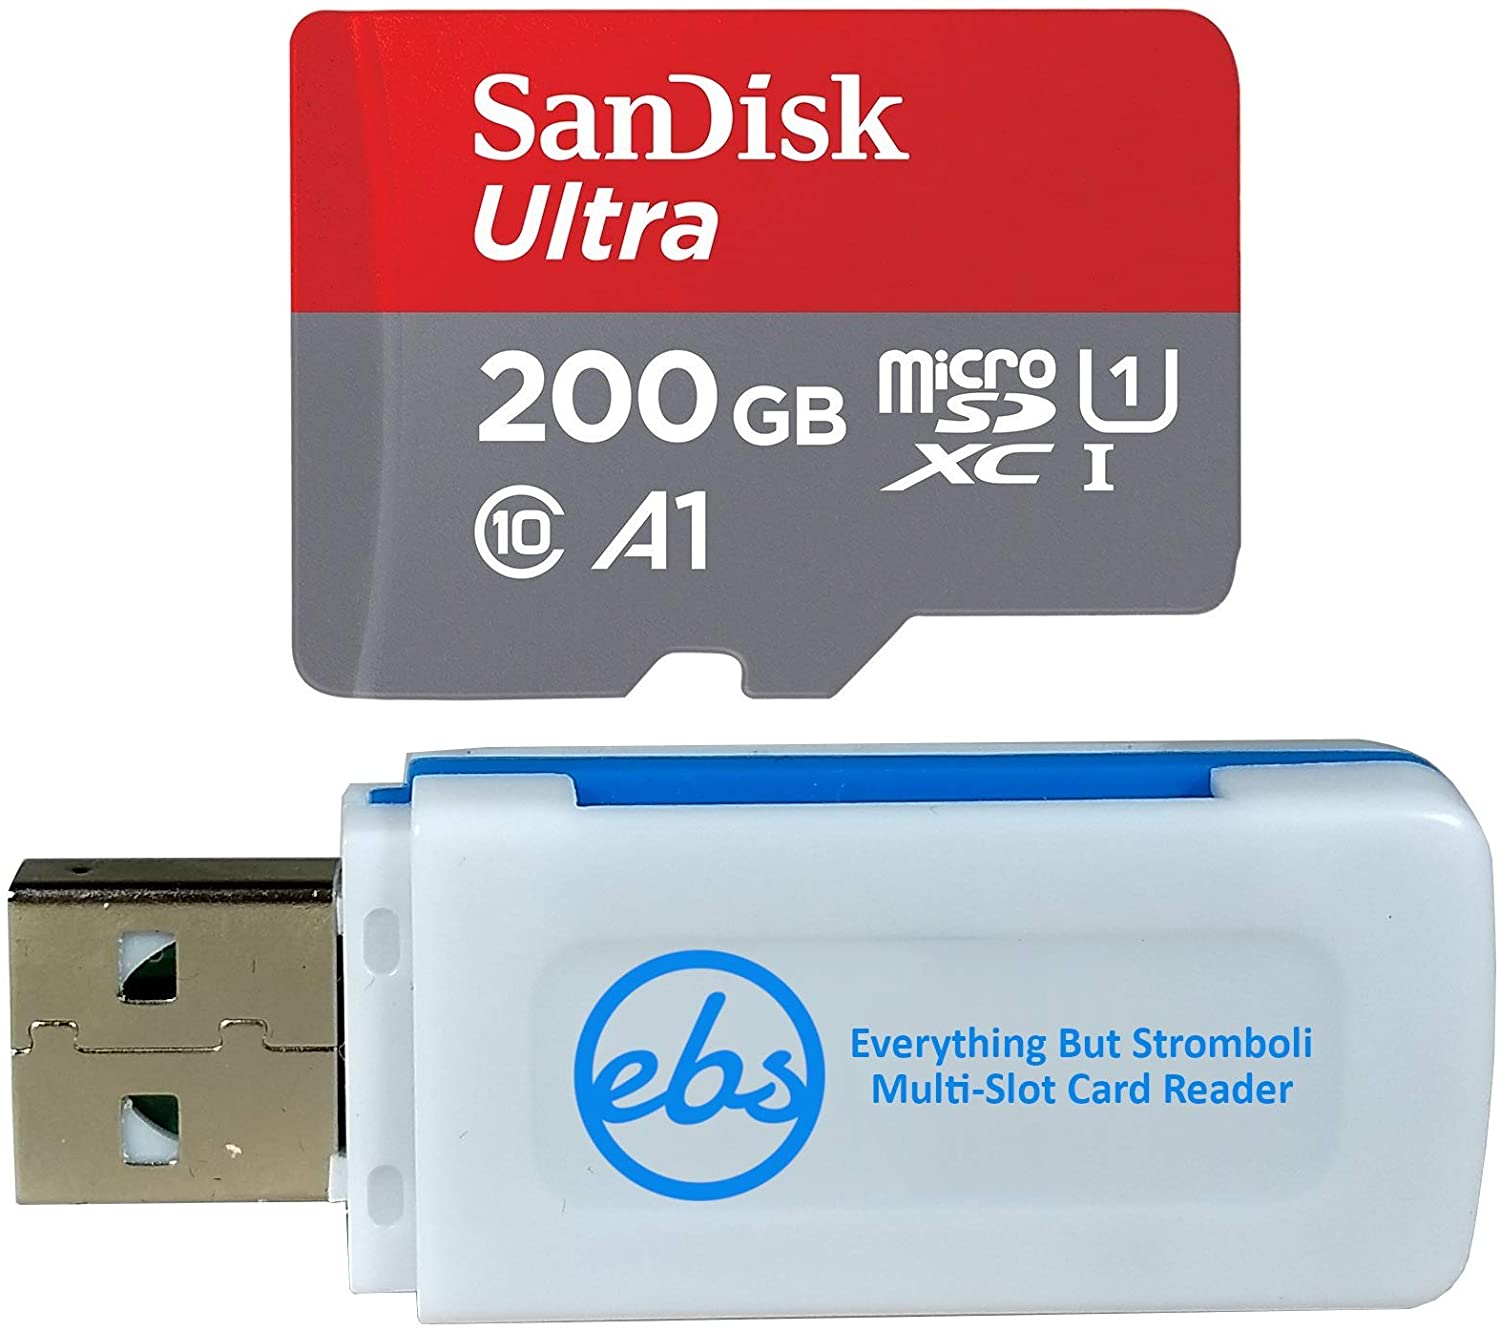 Sandisk 128gb Sdxc Micro Ultra Memory Card Works With Samsung Galaxy A10 0 0 Cell Phone Class 10 Sdsquar 128g Gn6mn Bundle With 1 Everything But Stromboli Microsd And Sd Card Reader Shopee